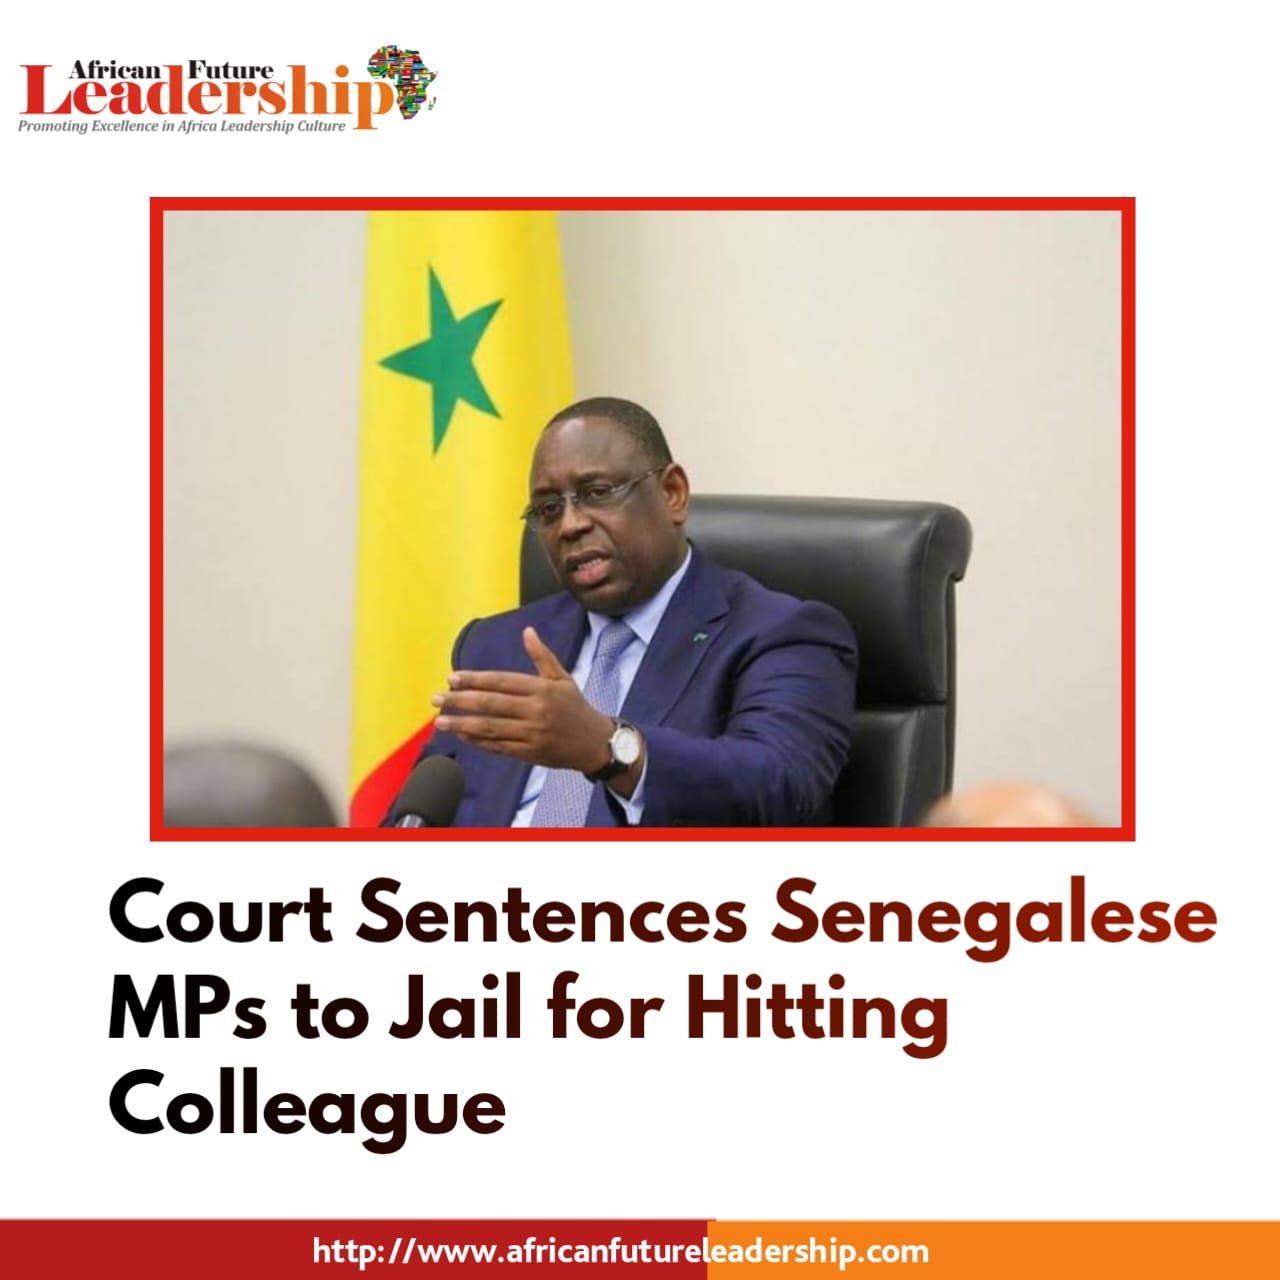 Court Sentences Senegalese MPs to Jail for Hitting Colleague